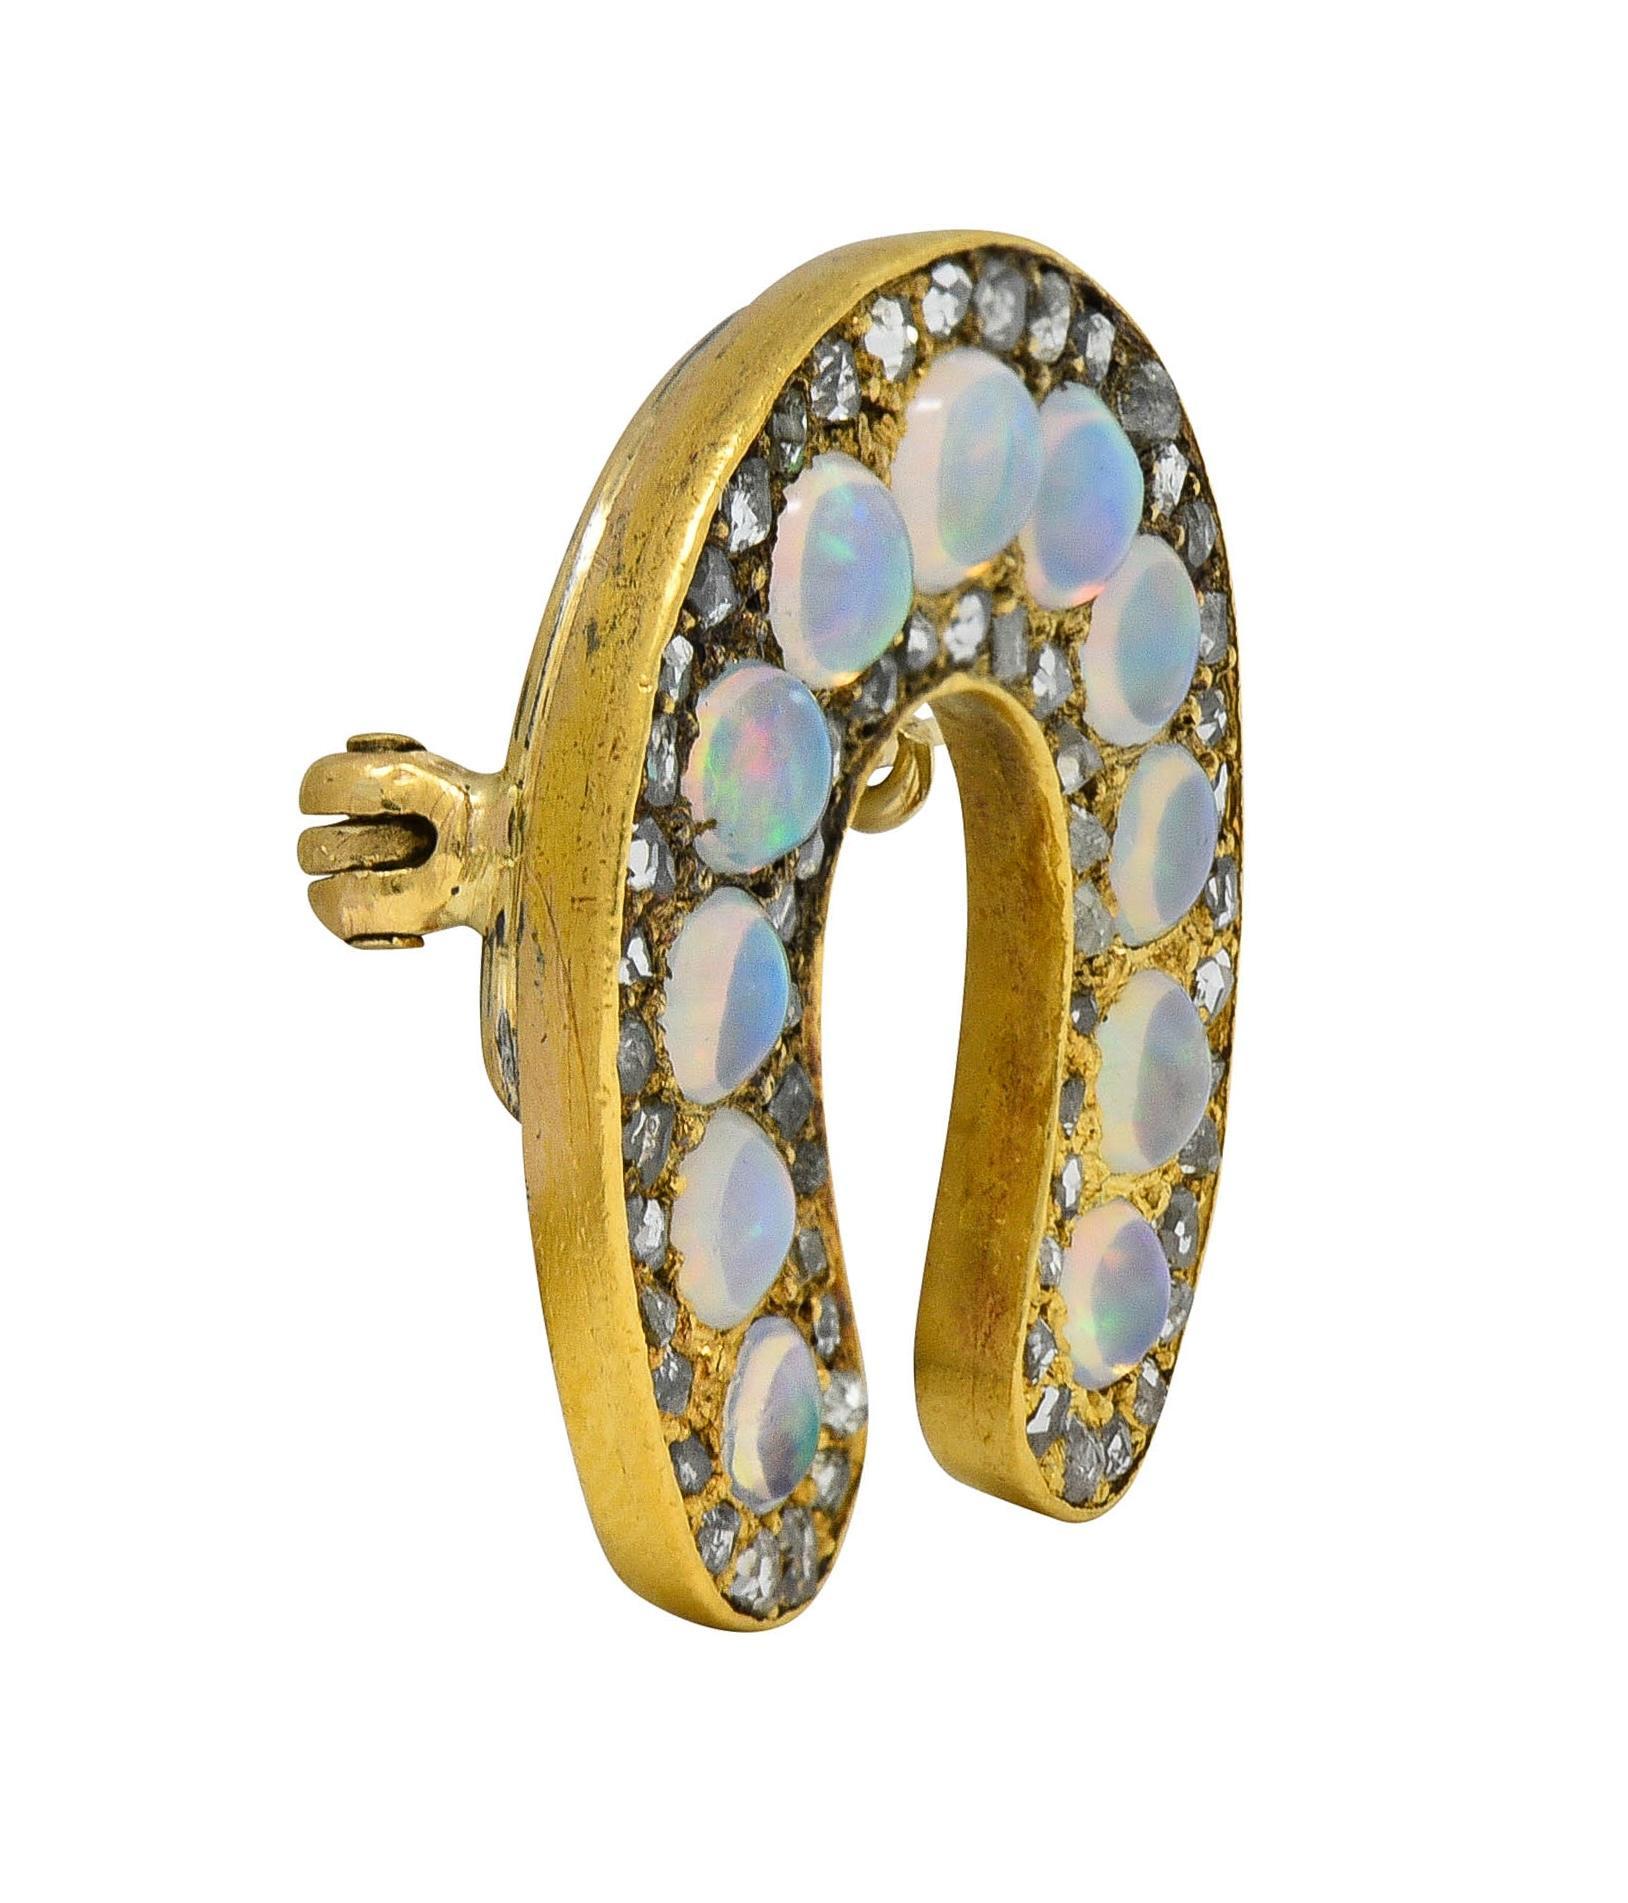 Designed as a horseshoe form featuring a row of jelly opal cabochons
Transparent colorless body with spectral play-of-color
Ranging in size from 2.5 to 3.5 mm round 
Bead set with halo of rose cut diamonds 
Weighing approximately 0.36 carat